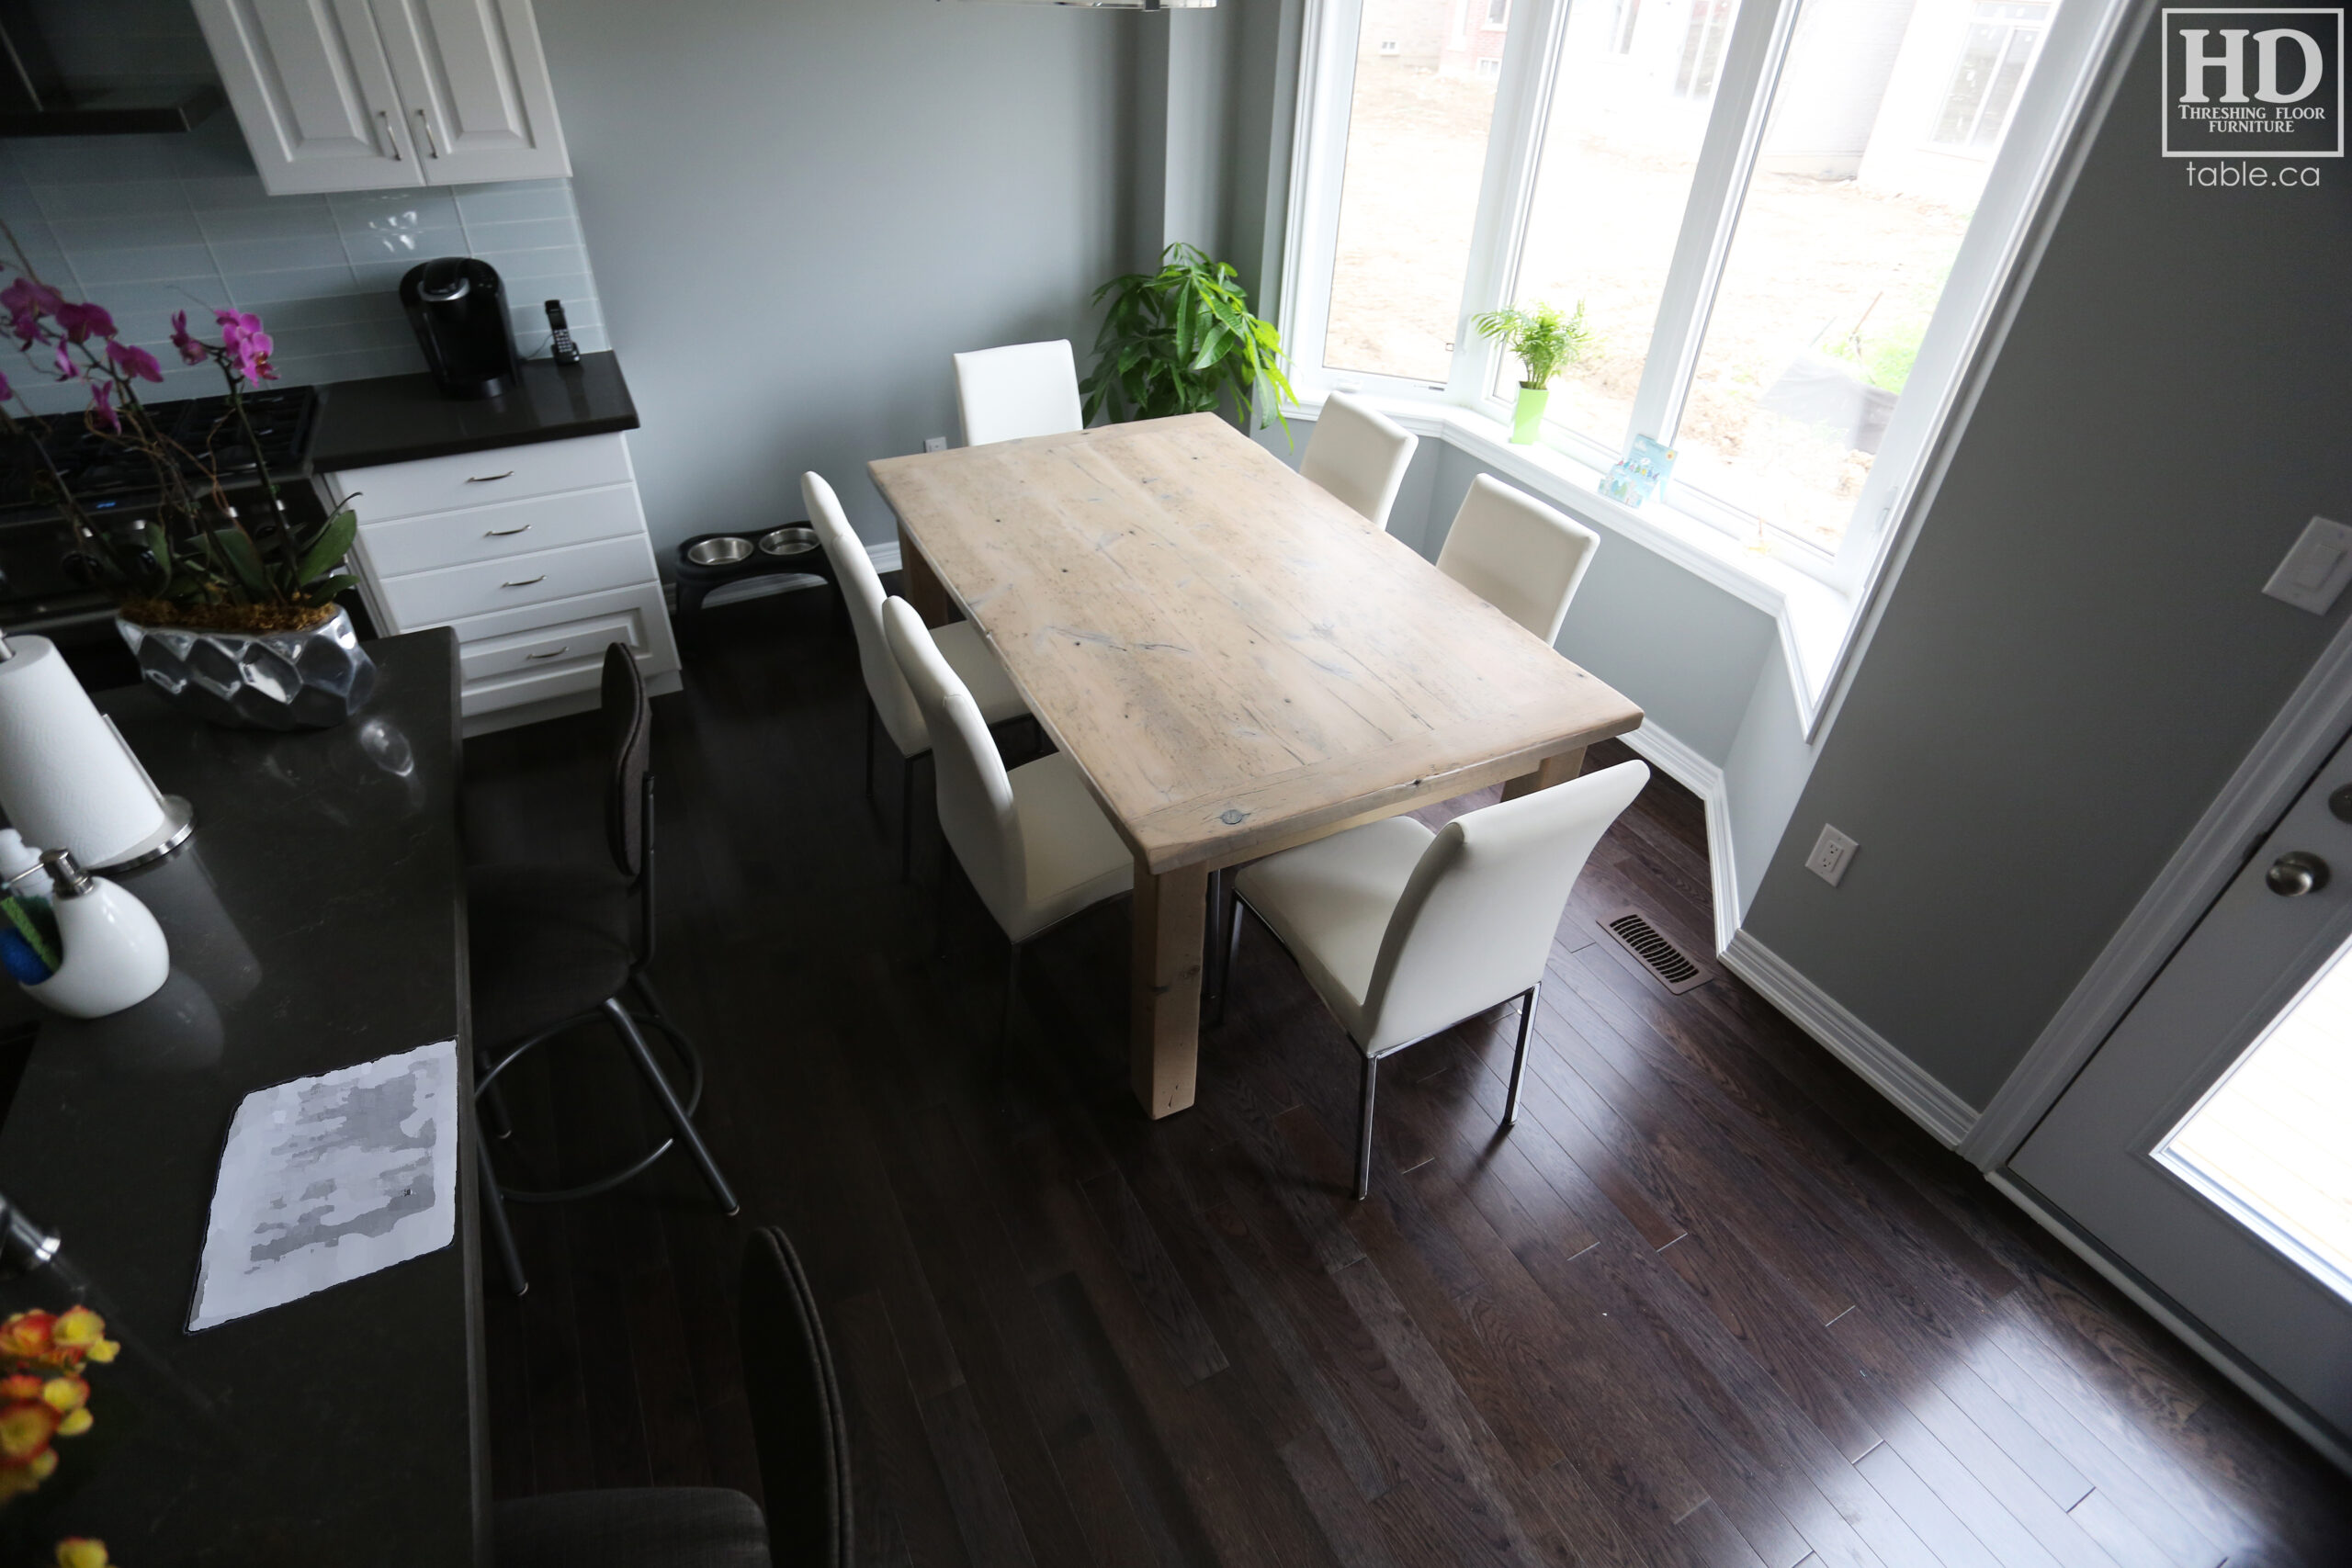 Reclaimed Wood Table with Whitewash Option / www.table.ca